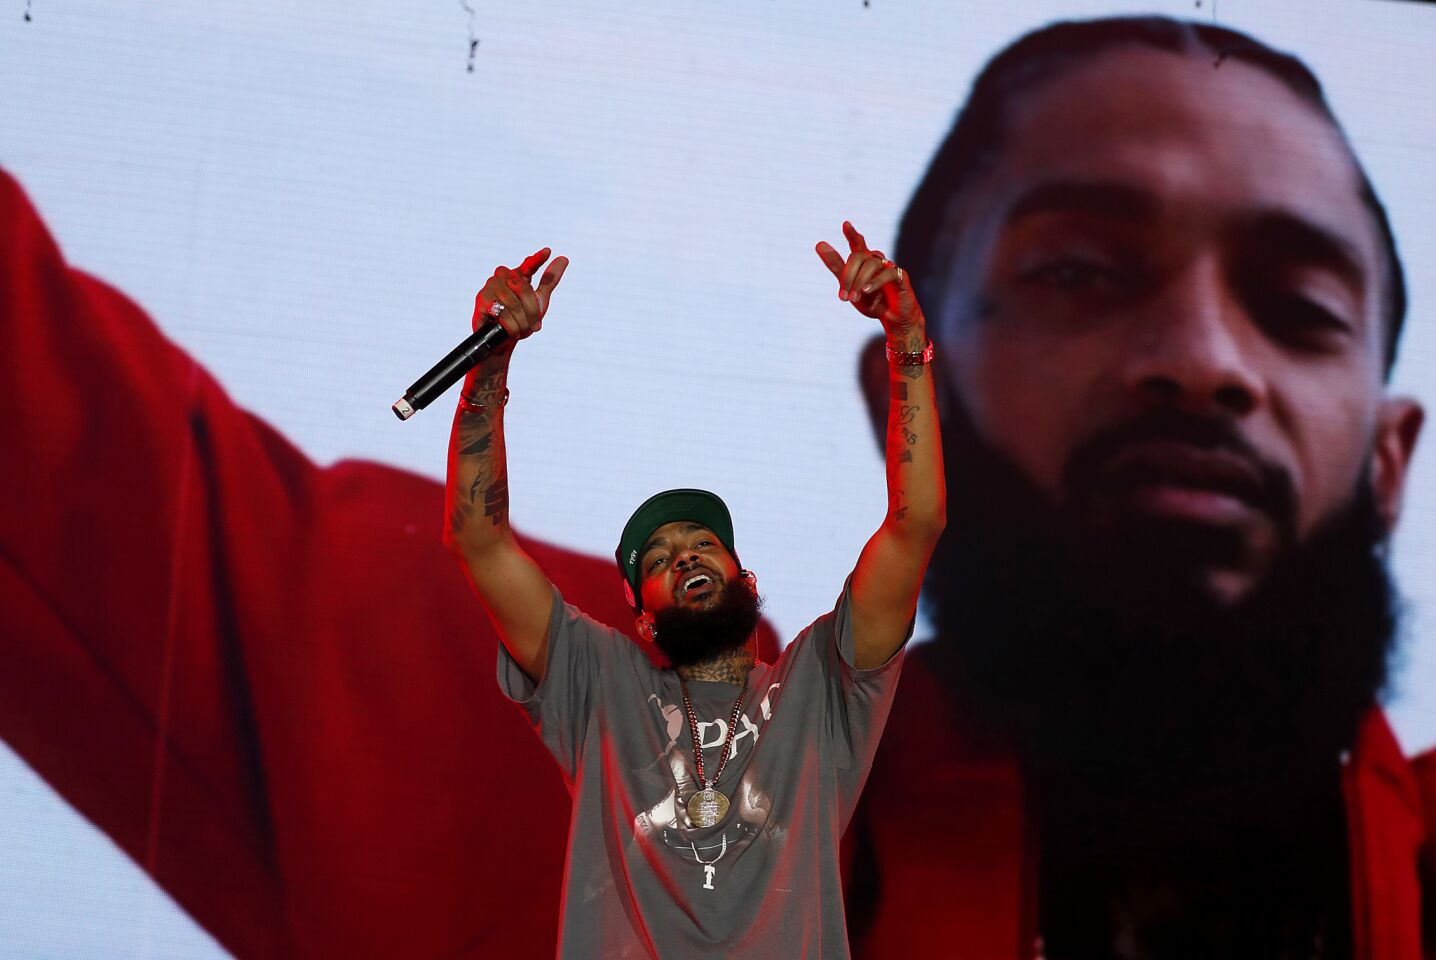 Nipsey Hussle performs during the Rolling Loud festival at Exposition Park on Dec. 14, 2018.